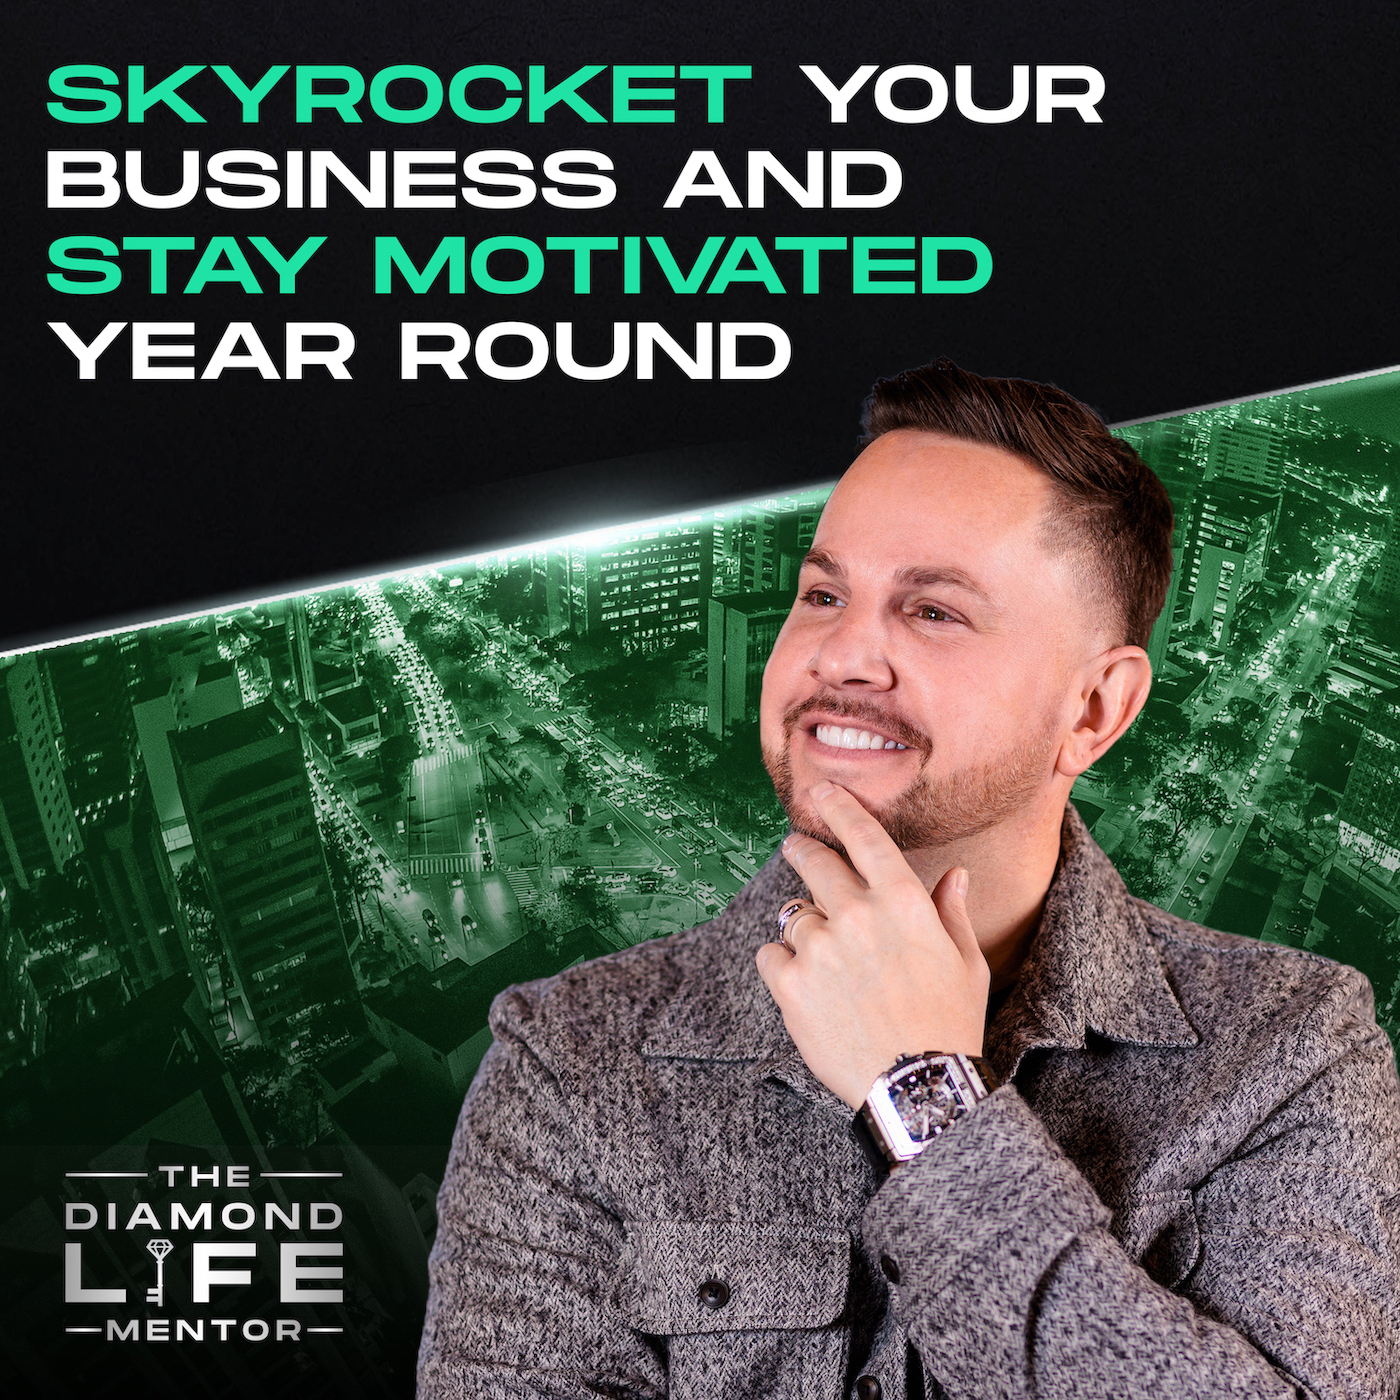 Skyrocket Your Business And Stay Motivated Year Round